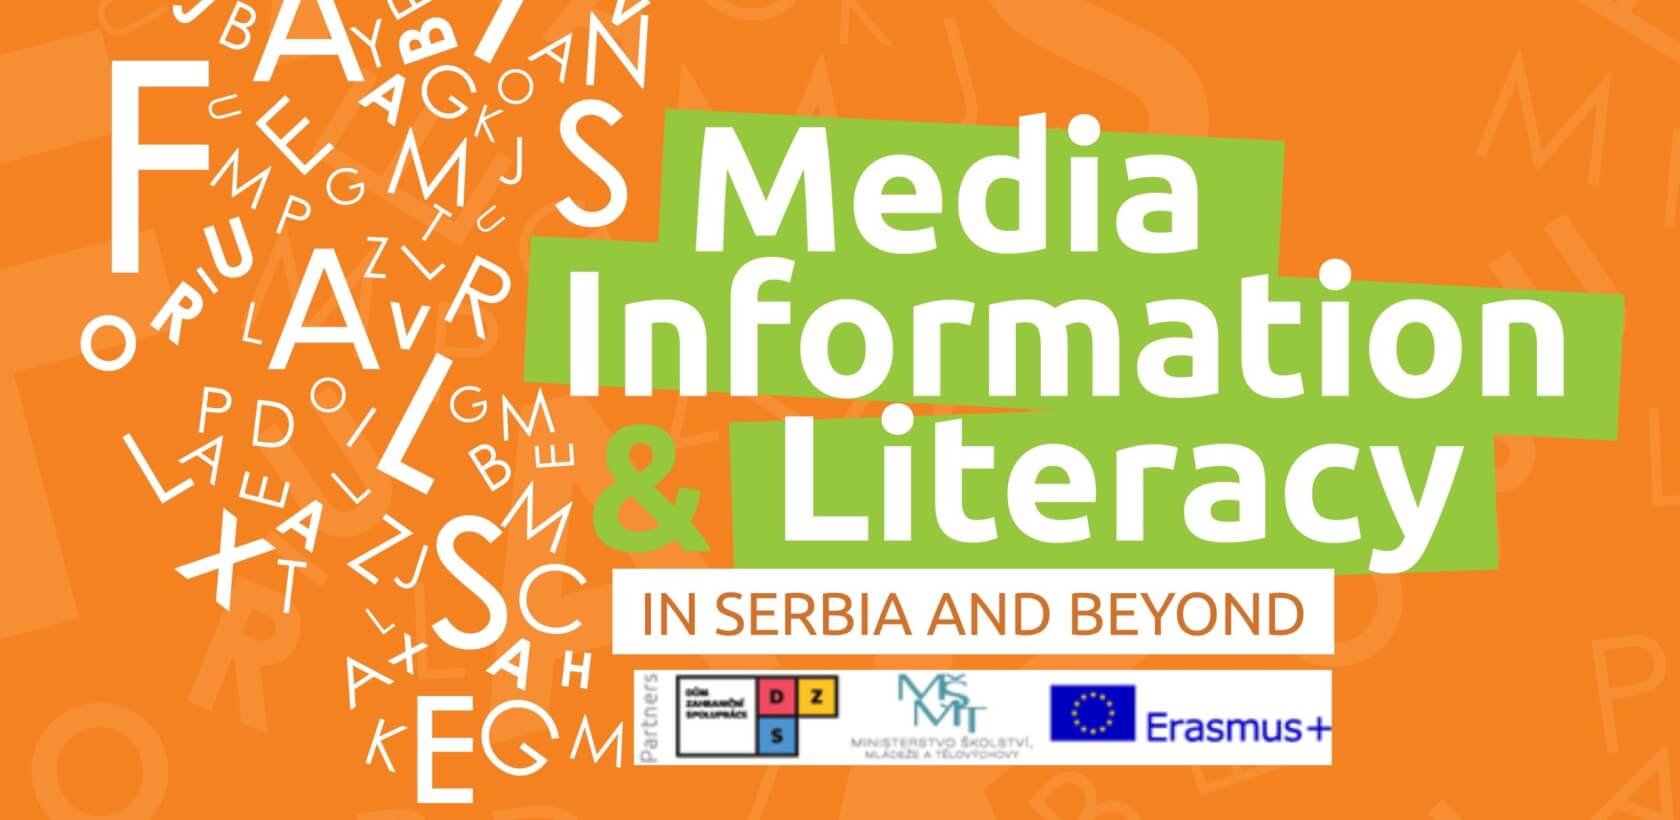 Media Information & Literacy: Articles Written by YouthTime Participants